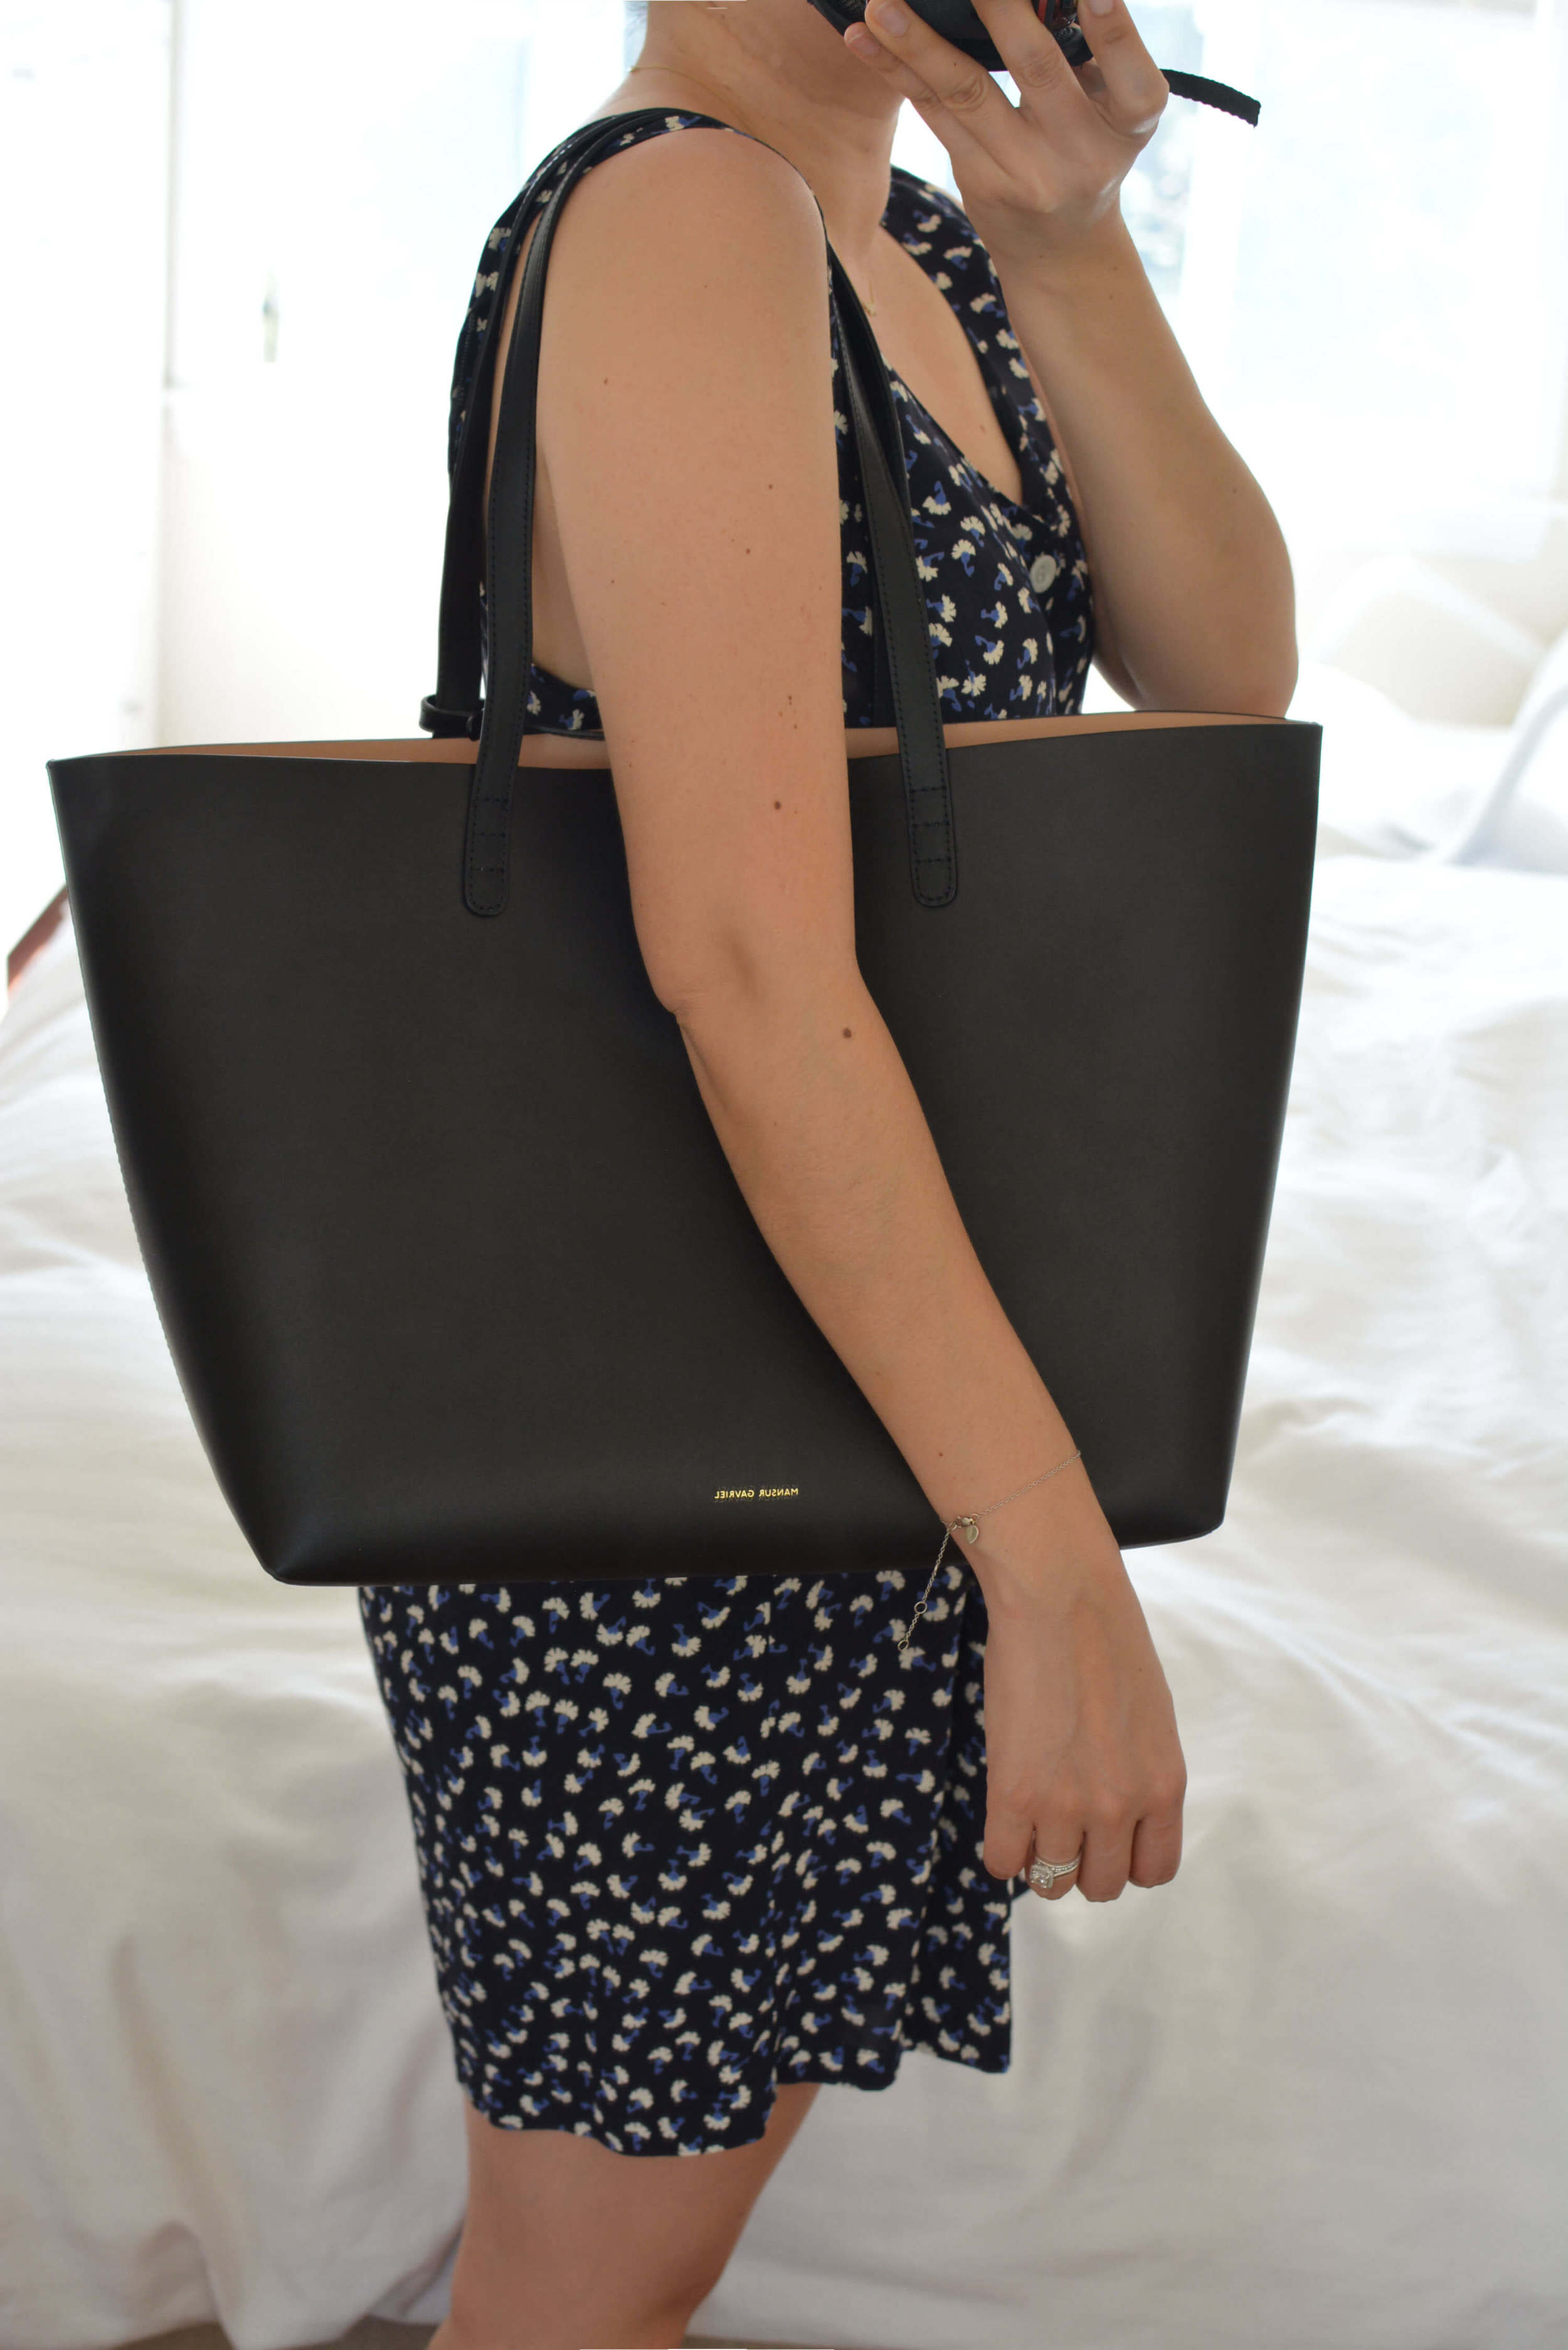 Review: Mansur Gavriel Large Tote (Pros, Cons, Wear & Tear and